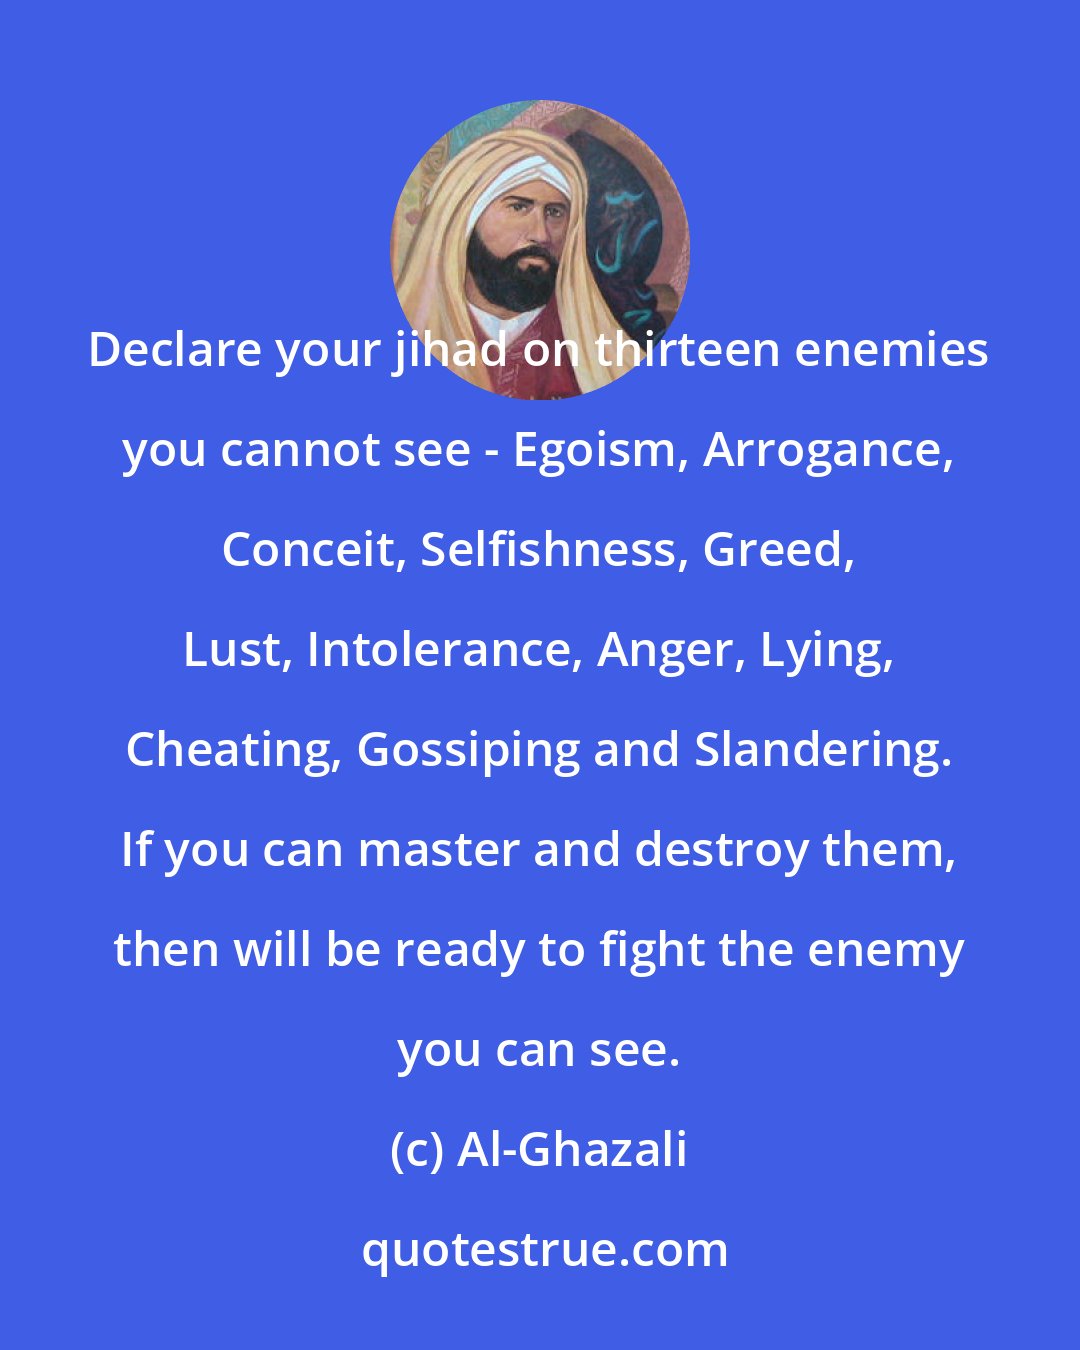 Al-Ghazali: Declare your jihad on thirteen enemies you cannot see - Egoism, Arrogance, Conceit, Selfishness, Greed, Lust, Intolerance, Anger, Lying, Cheating, Gossiping and Slandering. If you can master and destroy them, then will be ready to fight the enemy you can see.